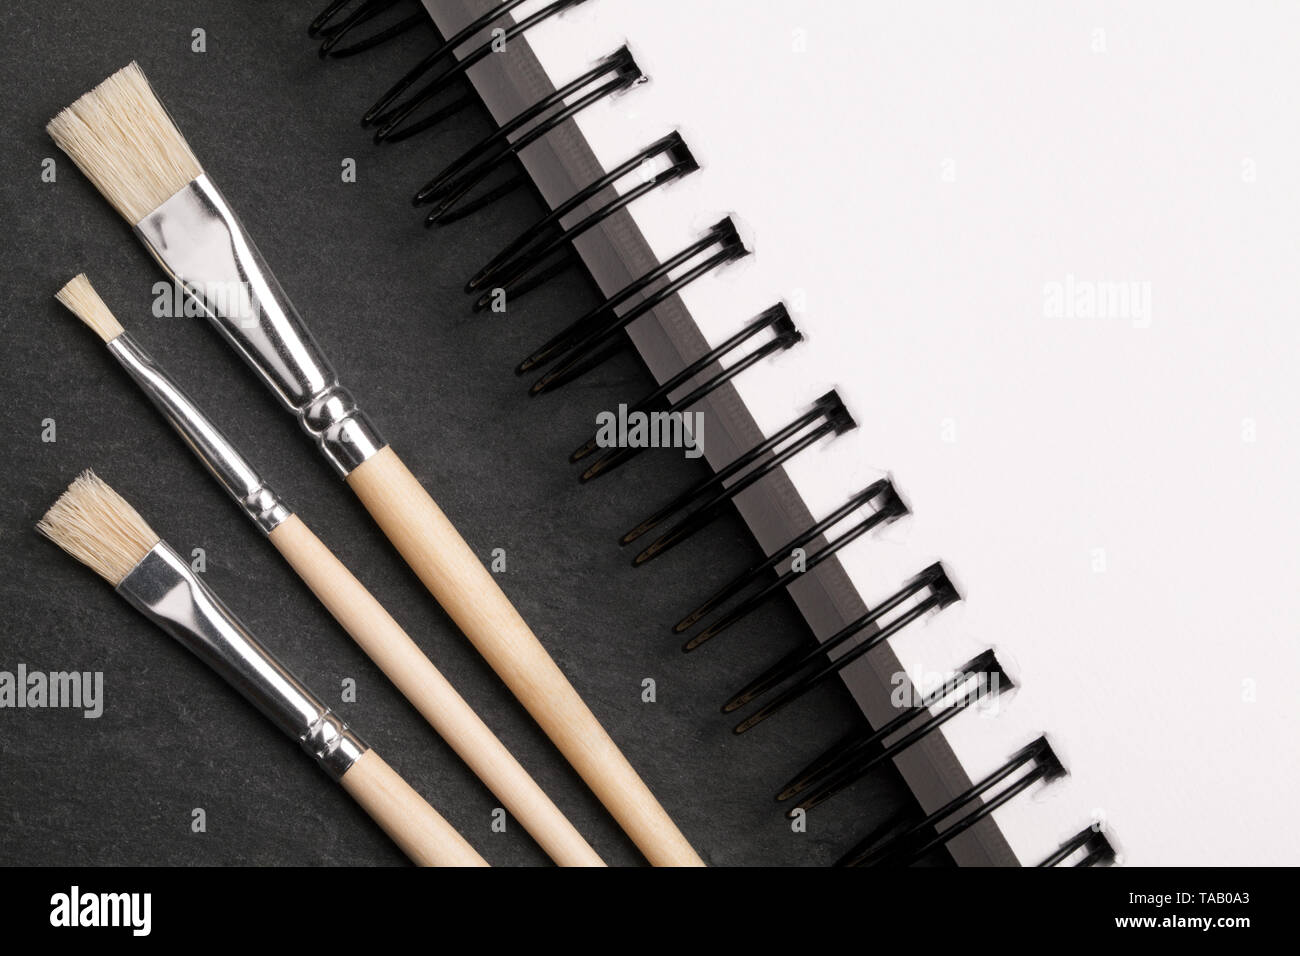 art background with brushes and a notebook Stock Photo